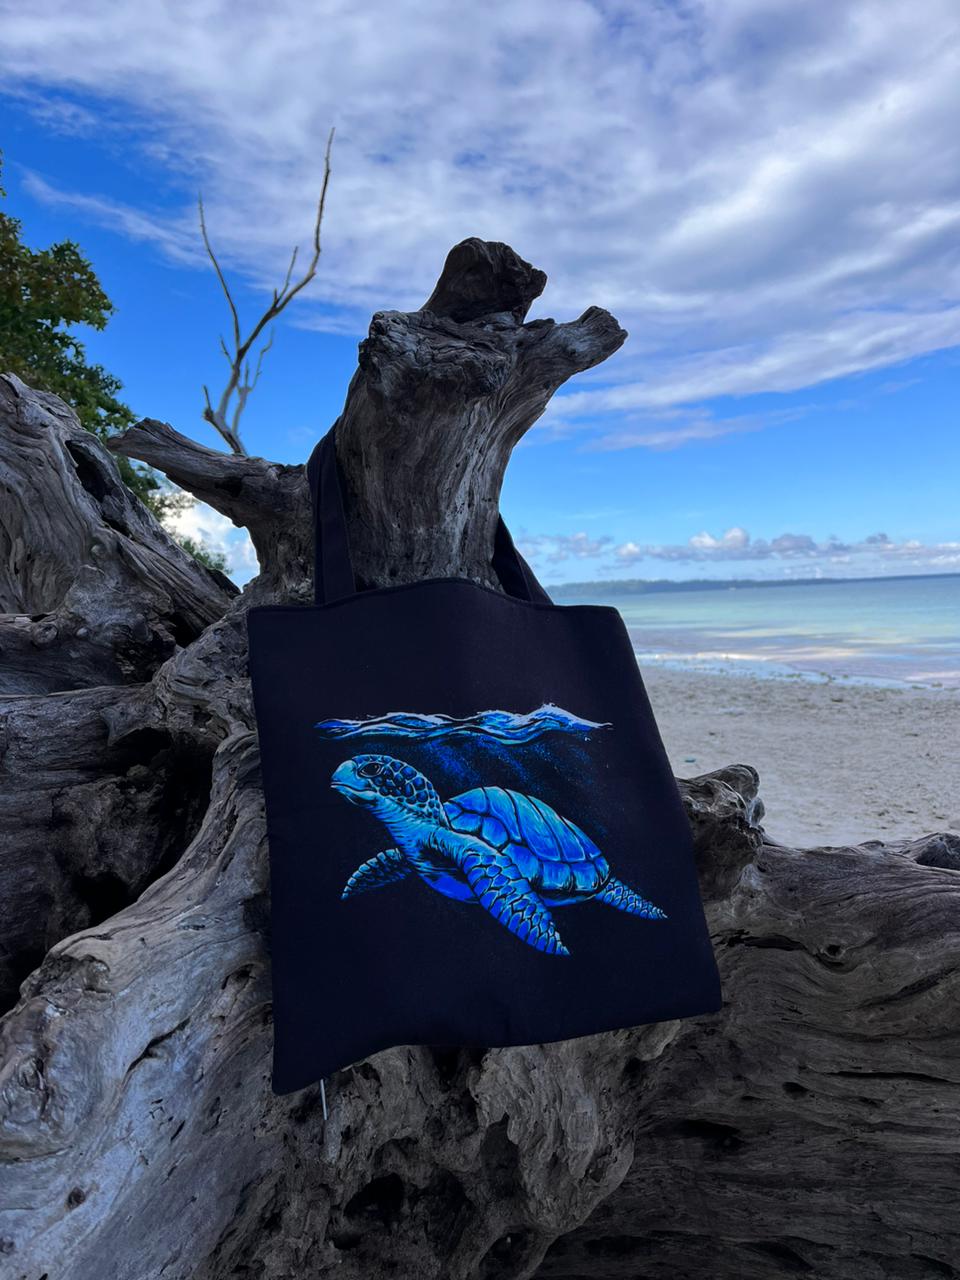  tote bag with a blue turtle design hanging on a driftwood log on a sandy beach, with the ocean and a cloudy sky in the background.